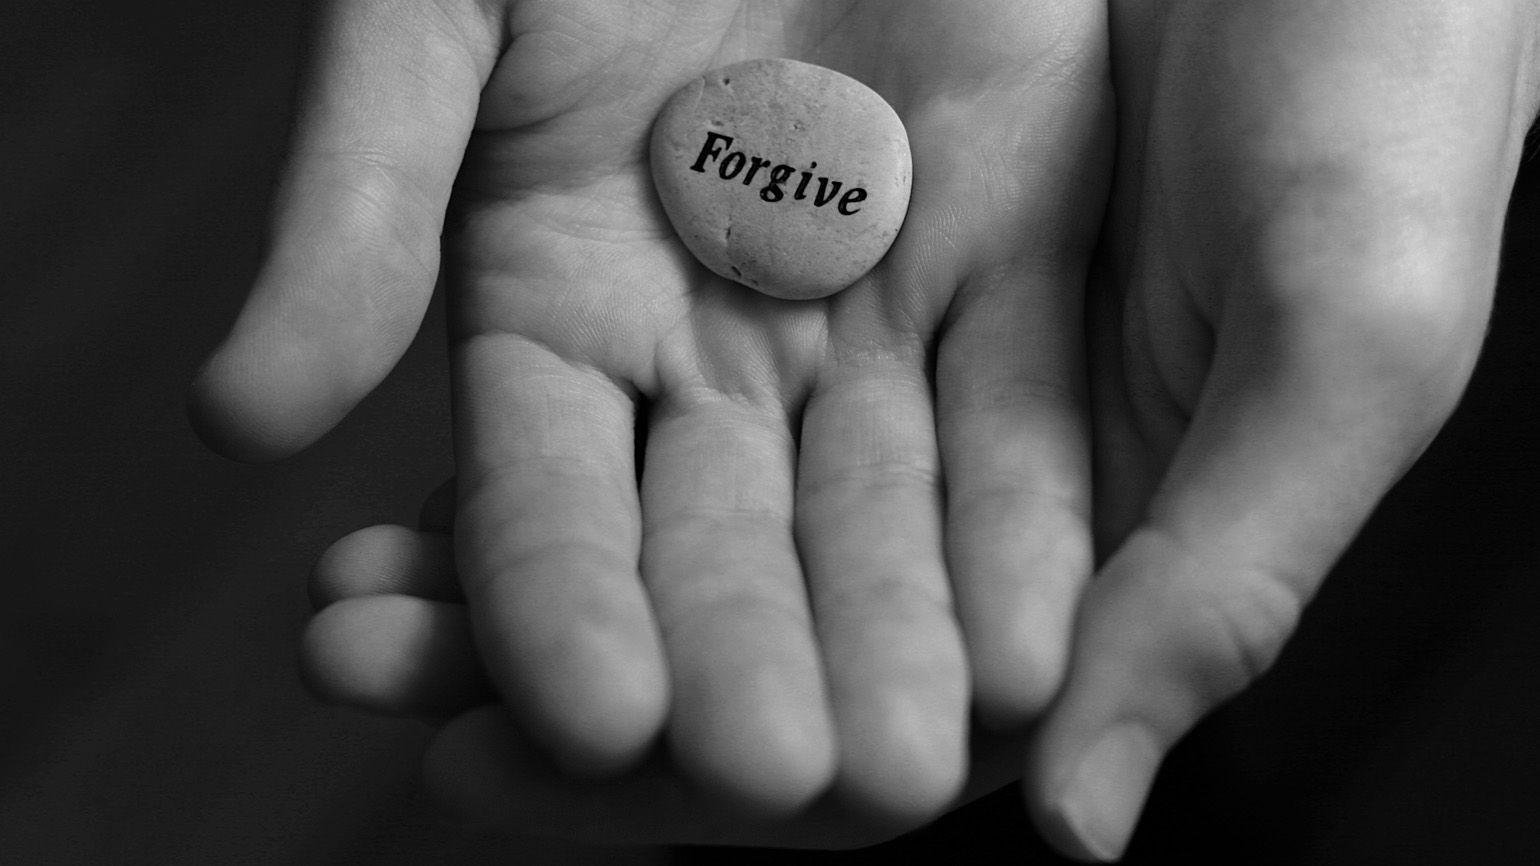 A black and white photo of hands holding a stone with 'Forgive' engraved on it.